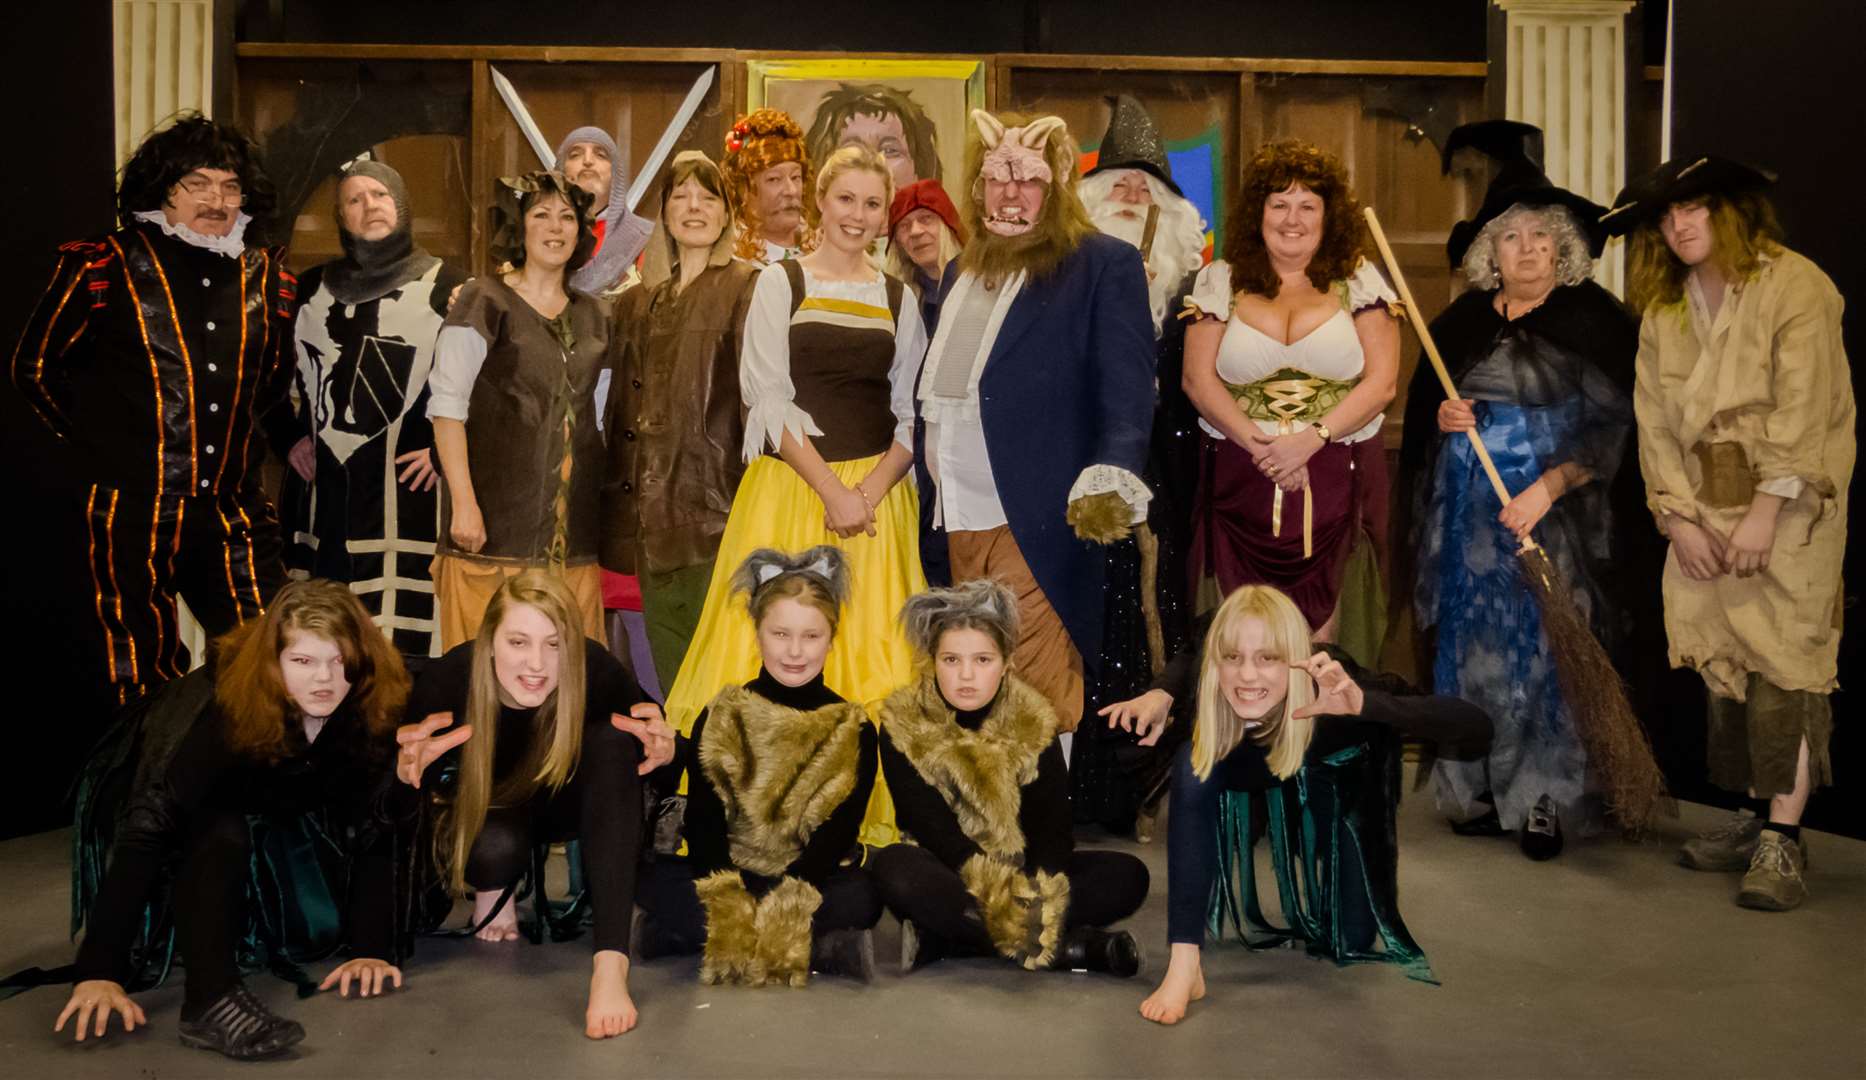 The Hare & Hound Players panto in Northbourne, Near Deal: Full cast photo